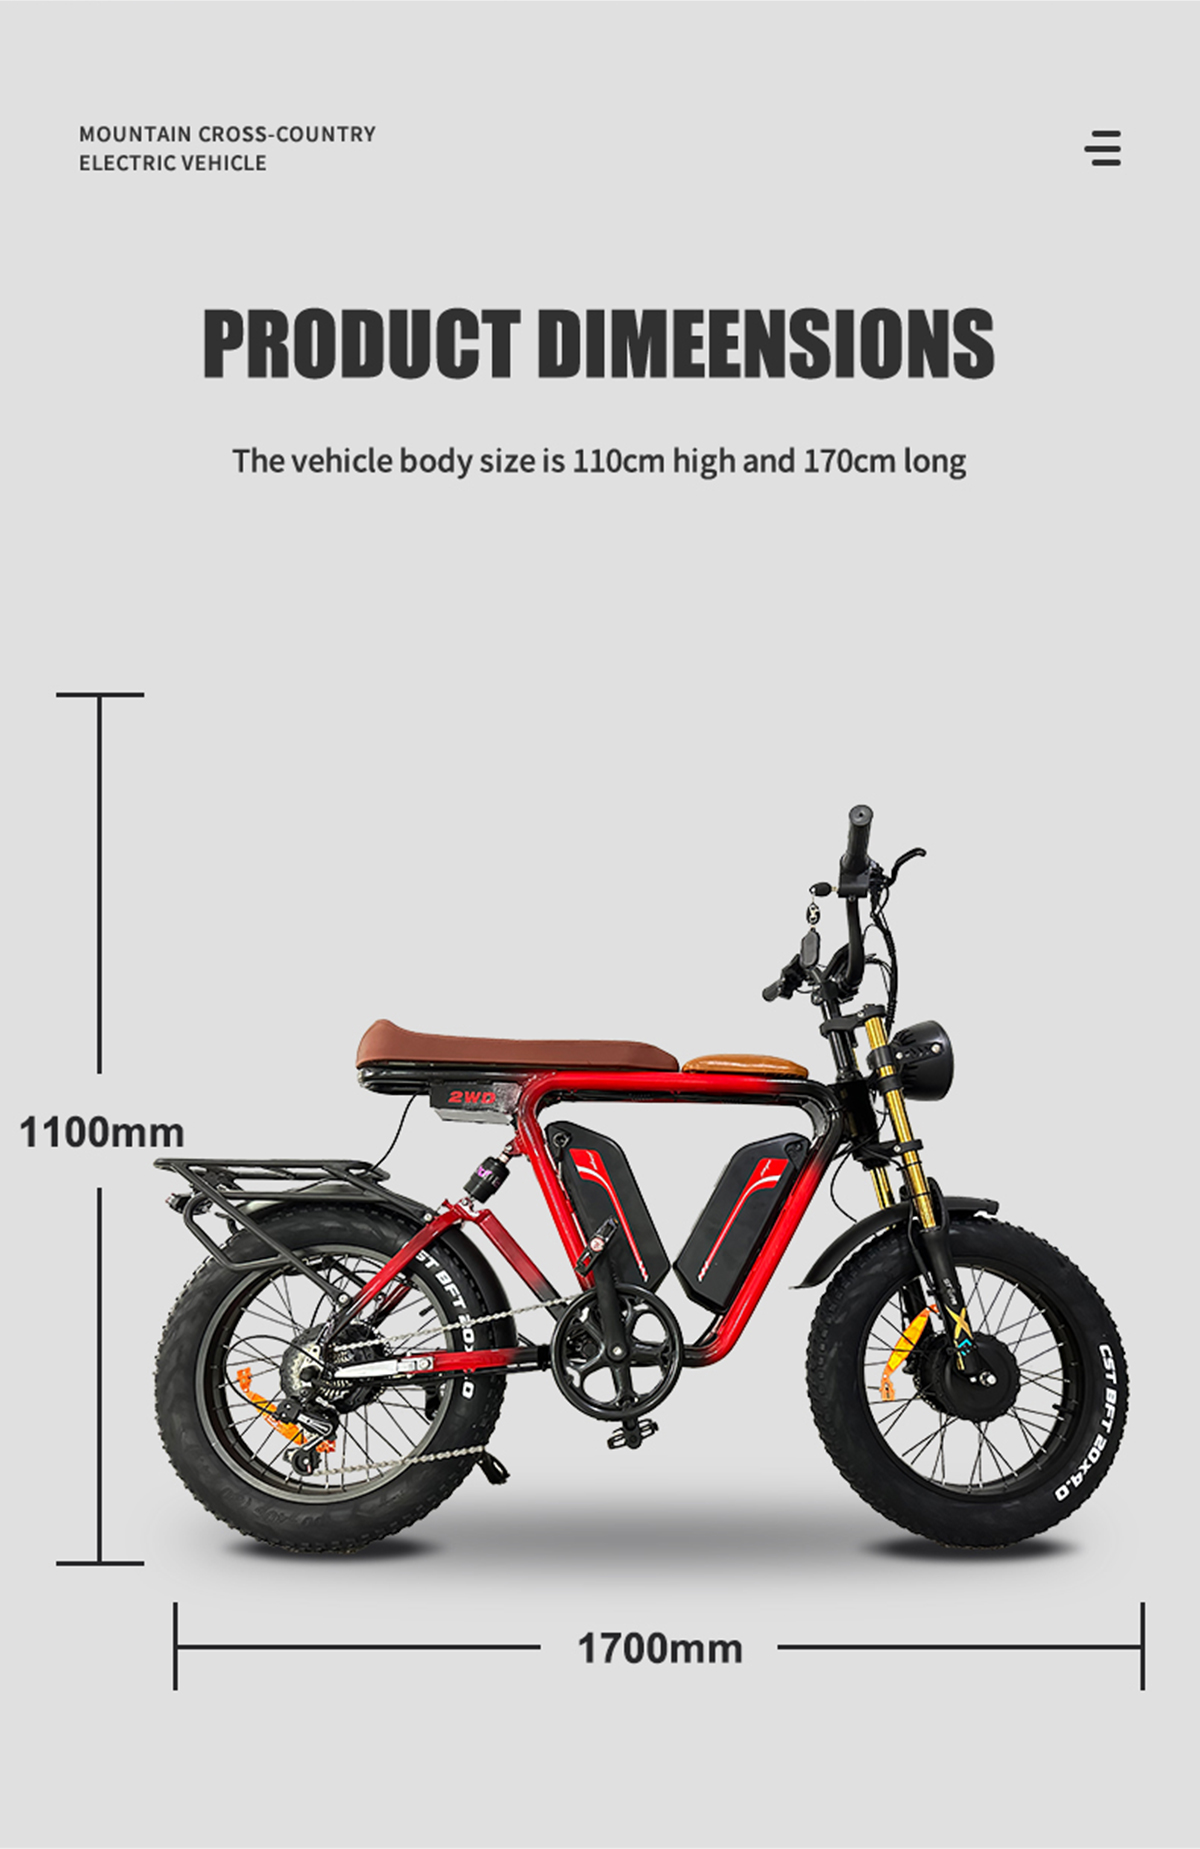 80-90kmPure Electric Cruising Range 55kmh With 5 Speed ​​Electric Bike Details 4